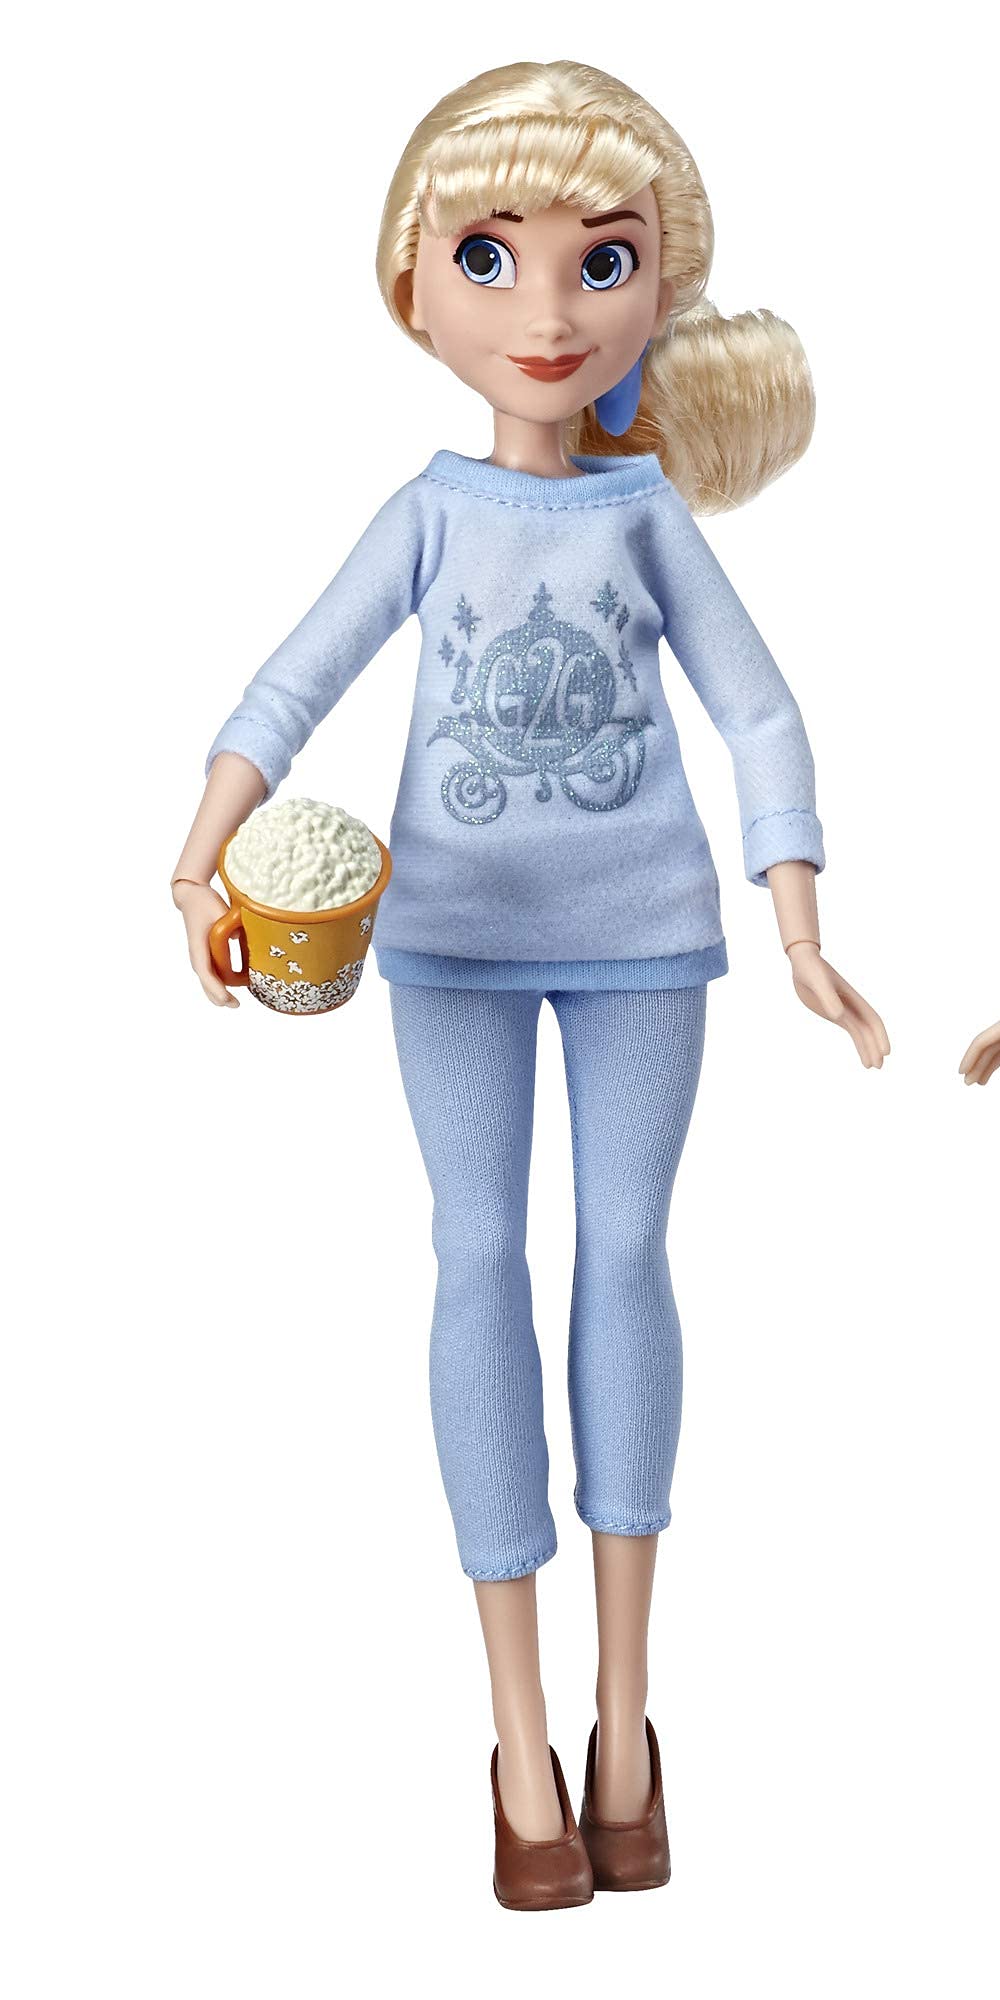 Disney Princess Ralph Breaks The Internet Movie Dolls, Cinderella and Mulan Dolls with Comfy Clothes and Accessories